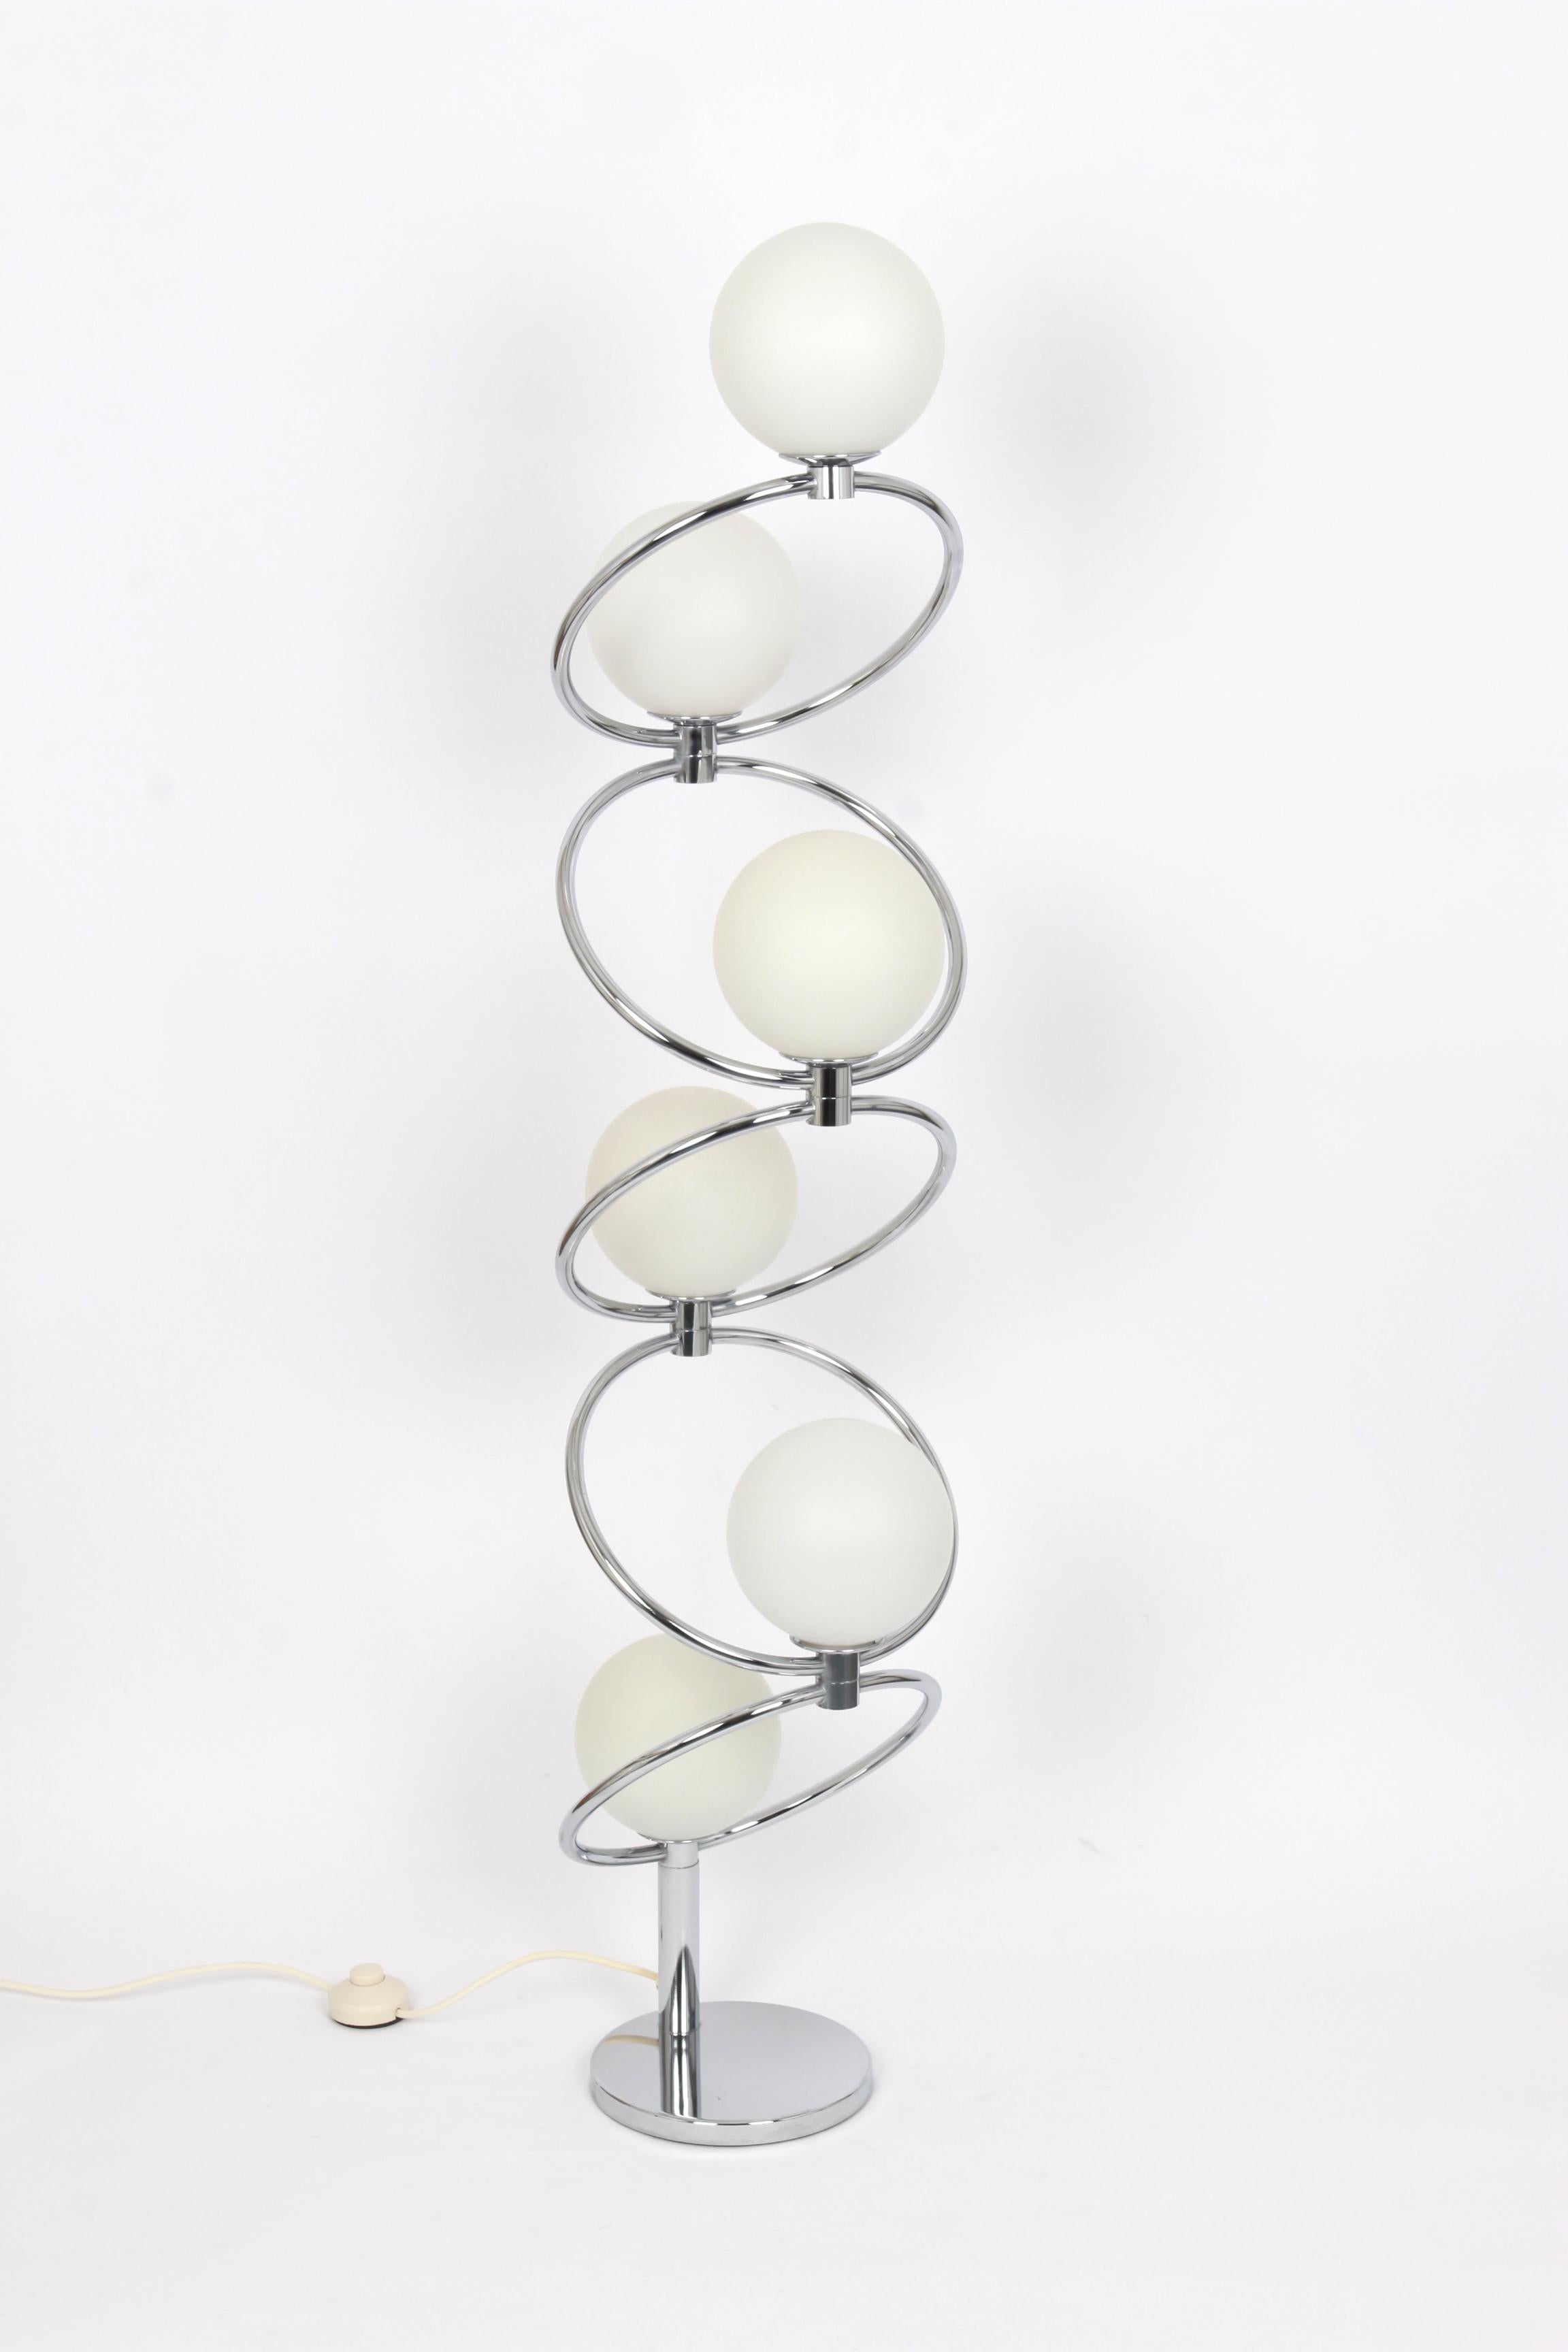 Atomic floor lamp with six-glass globes was designed by the Swiss artist and designer E. R. Nele for Temde Leuchten. The globes are hand blown and fitted with a screwing device.

High quality and in very good condition with a tiny dent on the